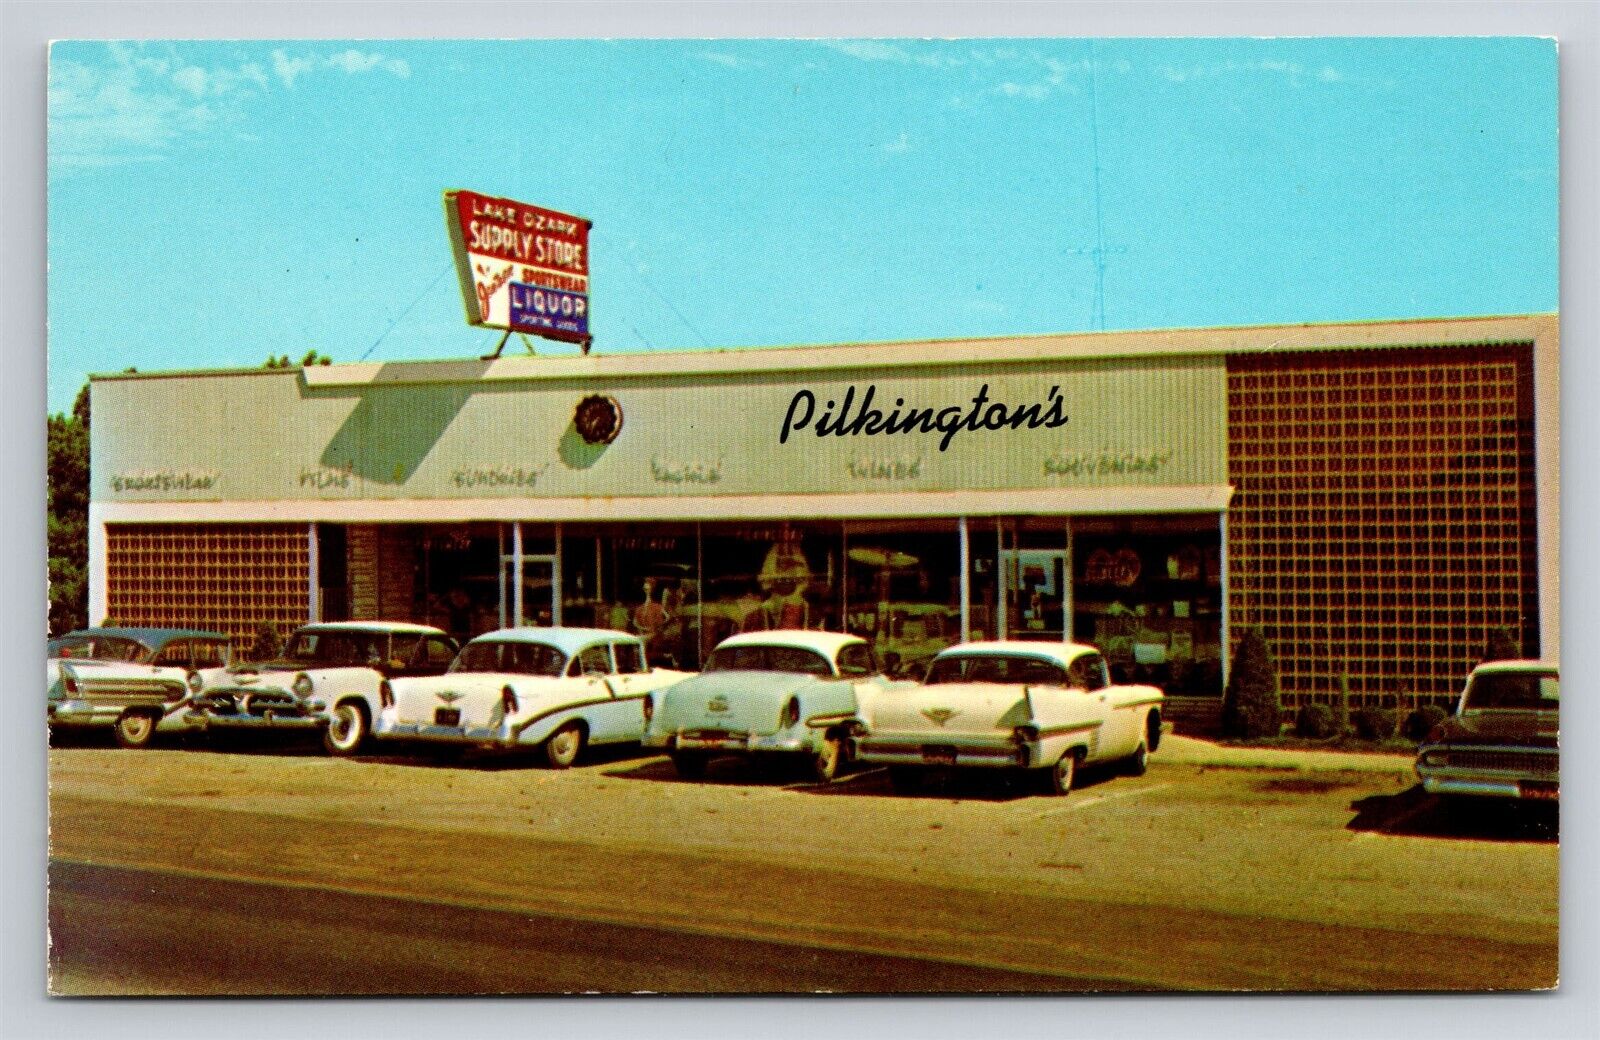 Bagnell Dam MO Pilkington's Supply Store Sign Old Car Lake of the Ozark Postcard